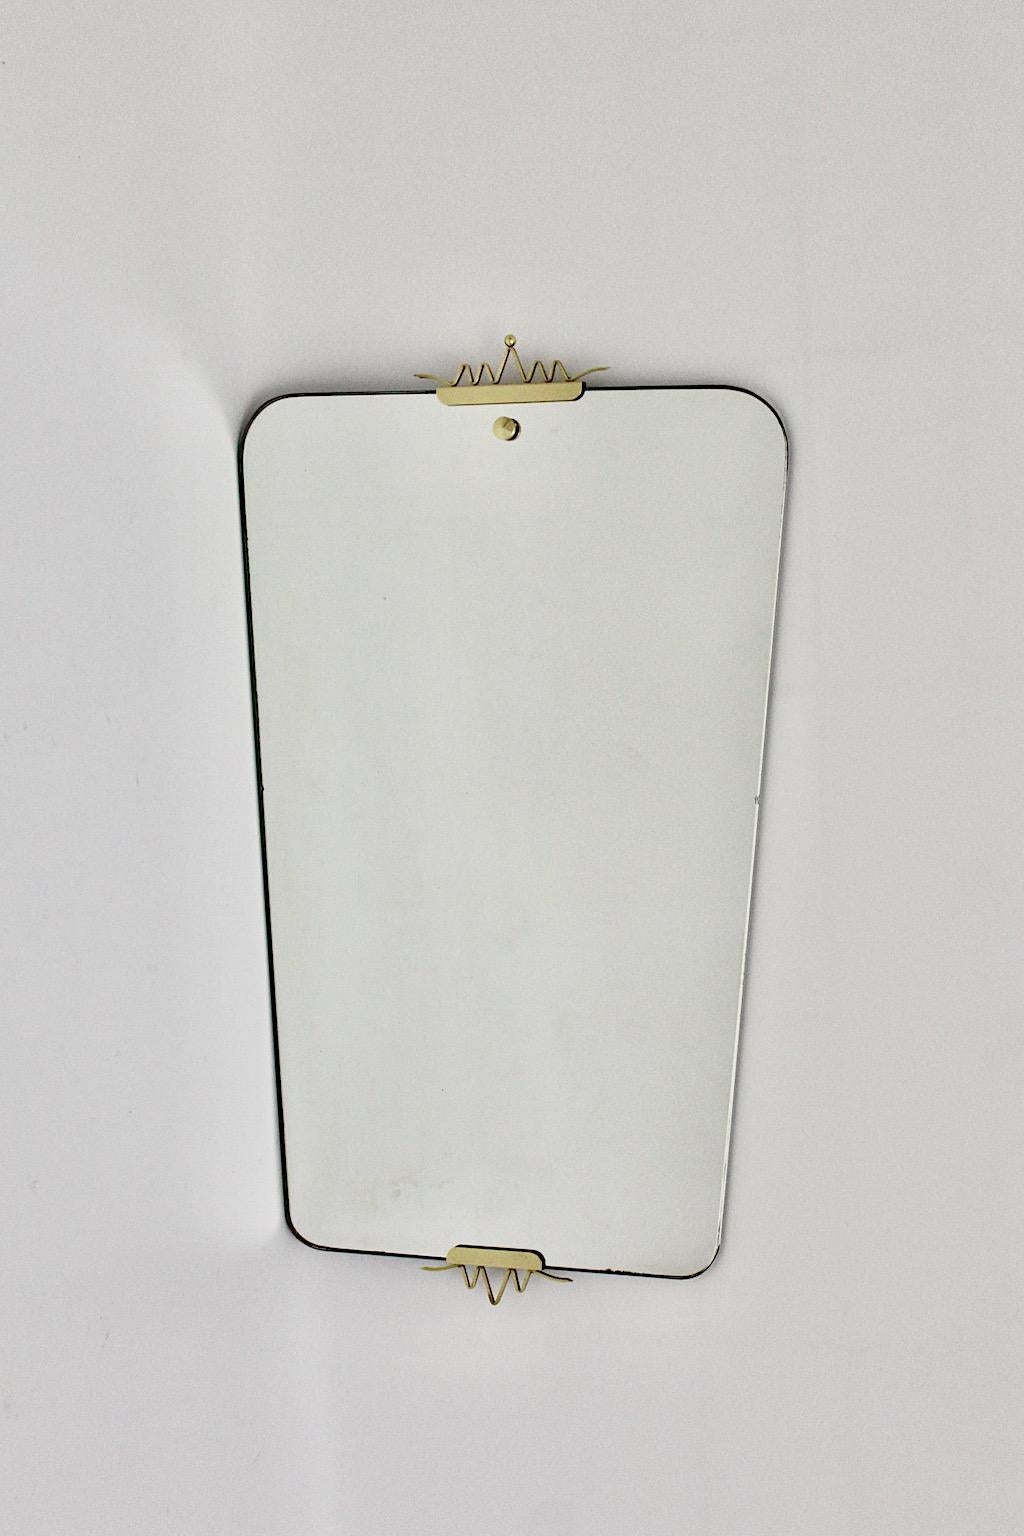 Mid-Century Modern vintage full length mirror wall mirror from mirror and brass Gio Ponti style 1950s Italy.
An amazing wall mirror with playful crown like decor from brass while the mirror shows rectangular shape with slightly rounded